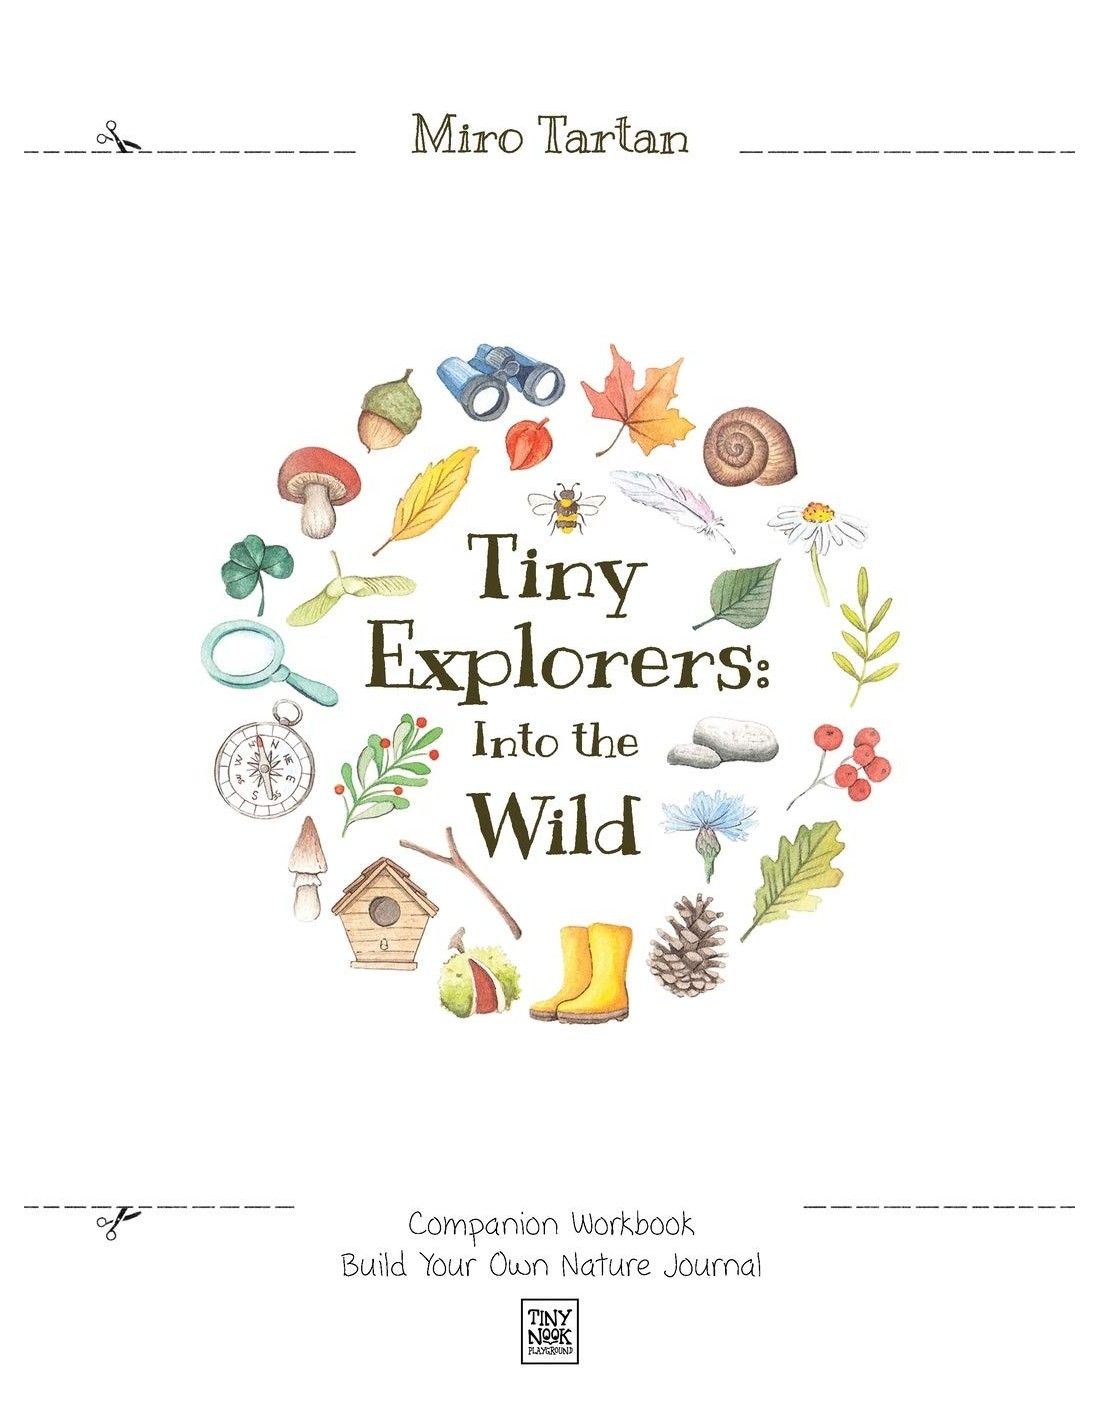 Tiny Explorers : Into the Wild - Companion Workbook: Build Your Own Nature Journal